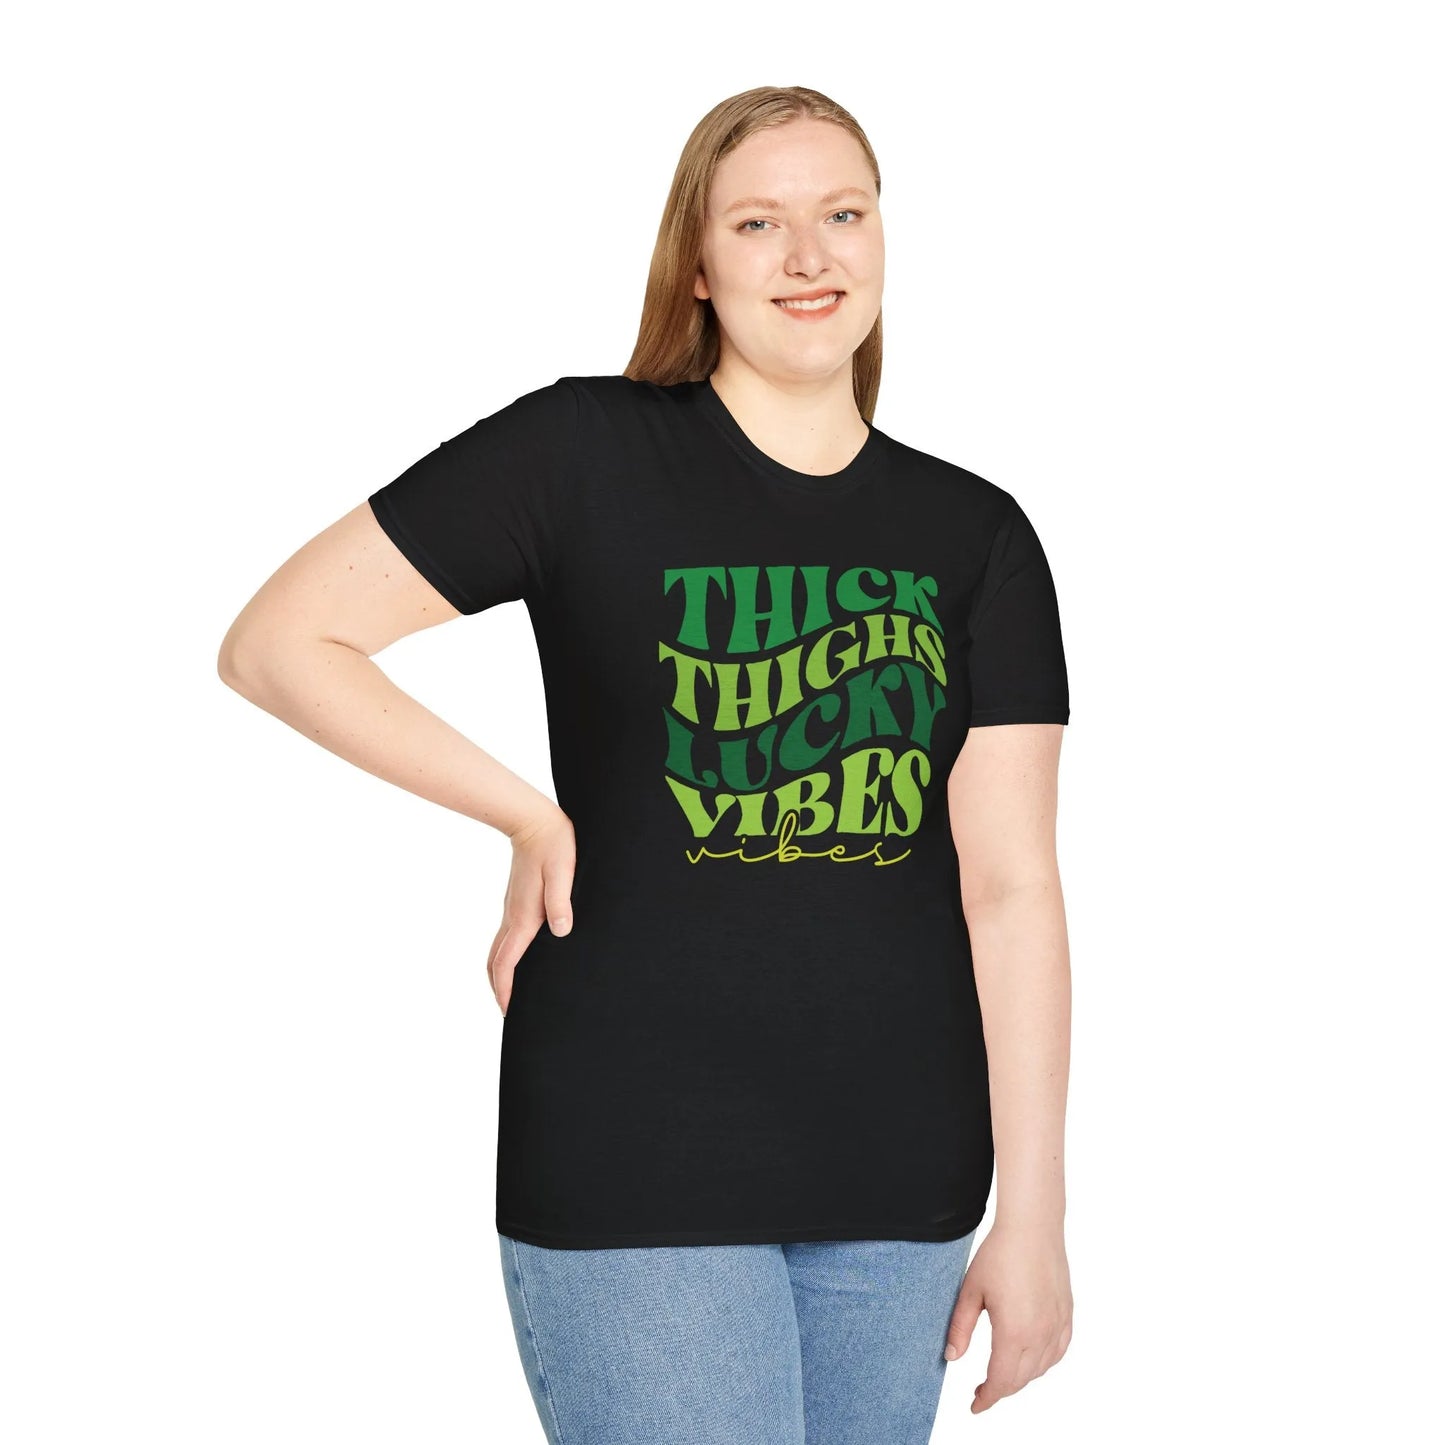 Thick Thighs Lucky Vibes Retro-Style St. Patrick's Day T-Shirt - Comfort & Charm - Thick Thighs Lucky Vibes St. Patrick's Day Shirt Black Model